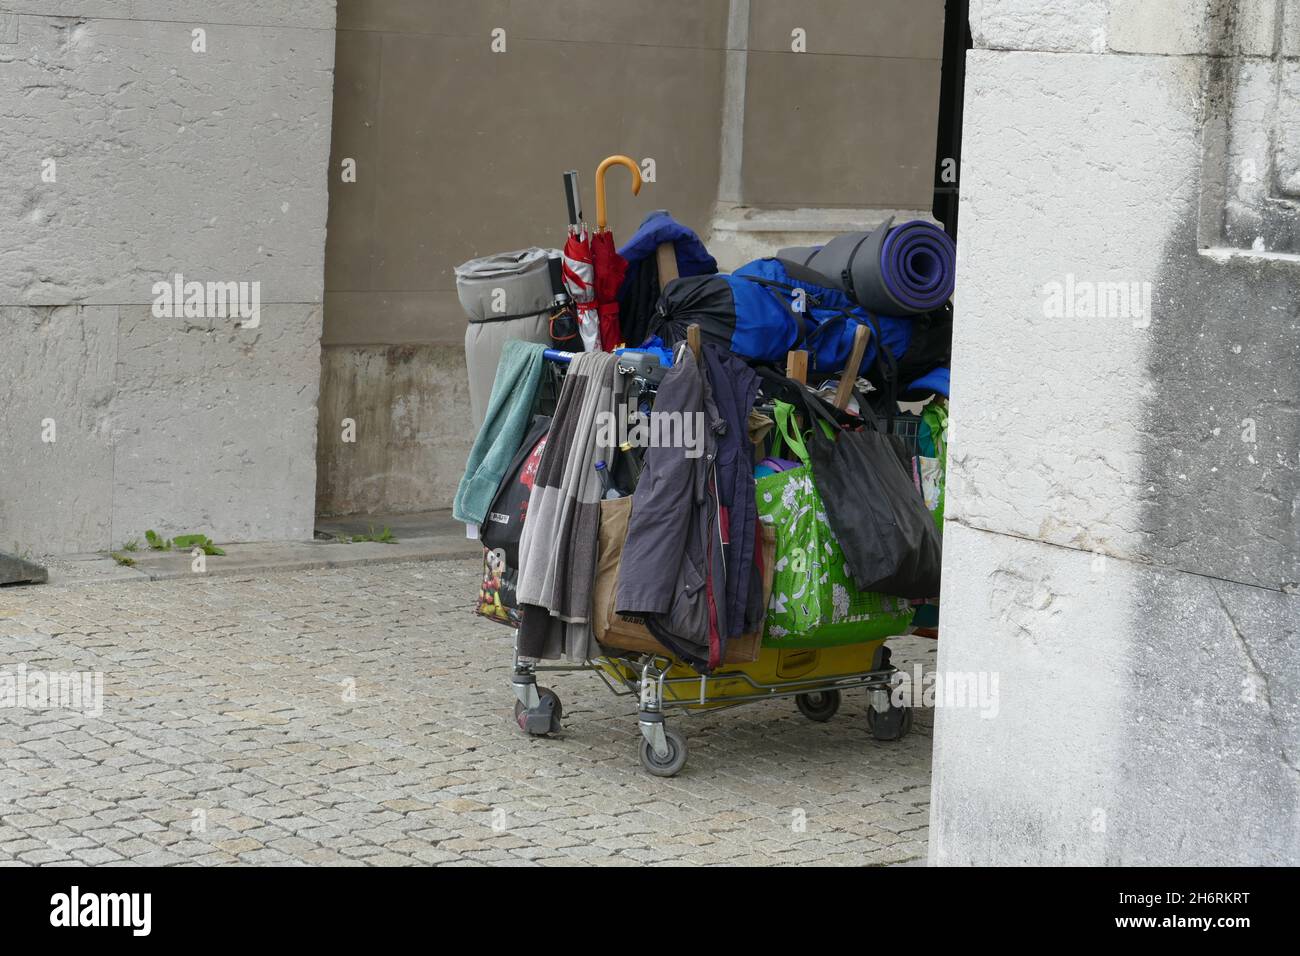 Poverty, homelessness. Rollcart of a homeless person with his belongings. Stock Photo